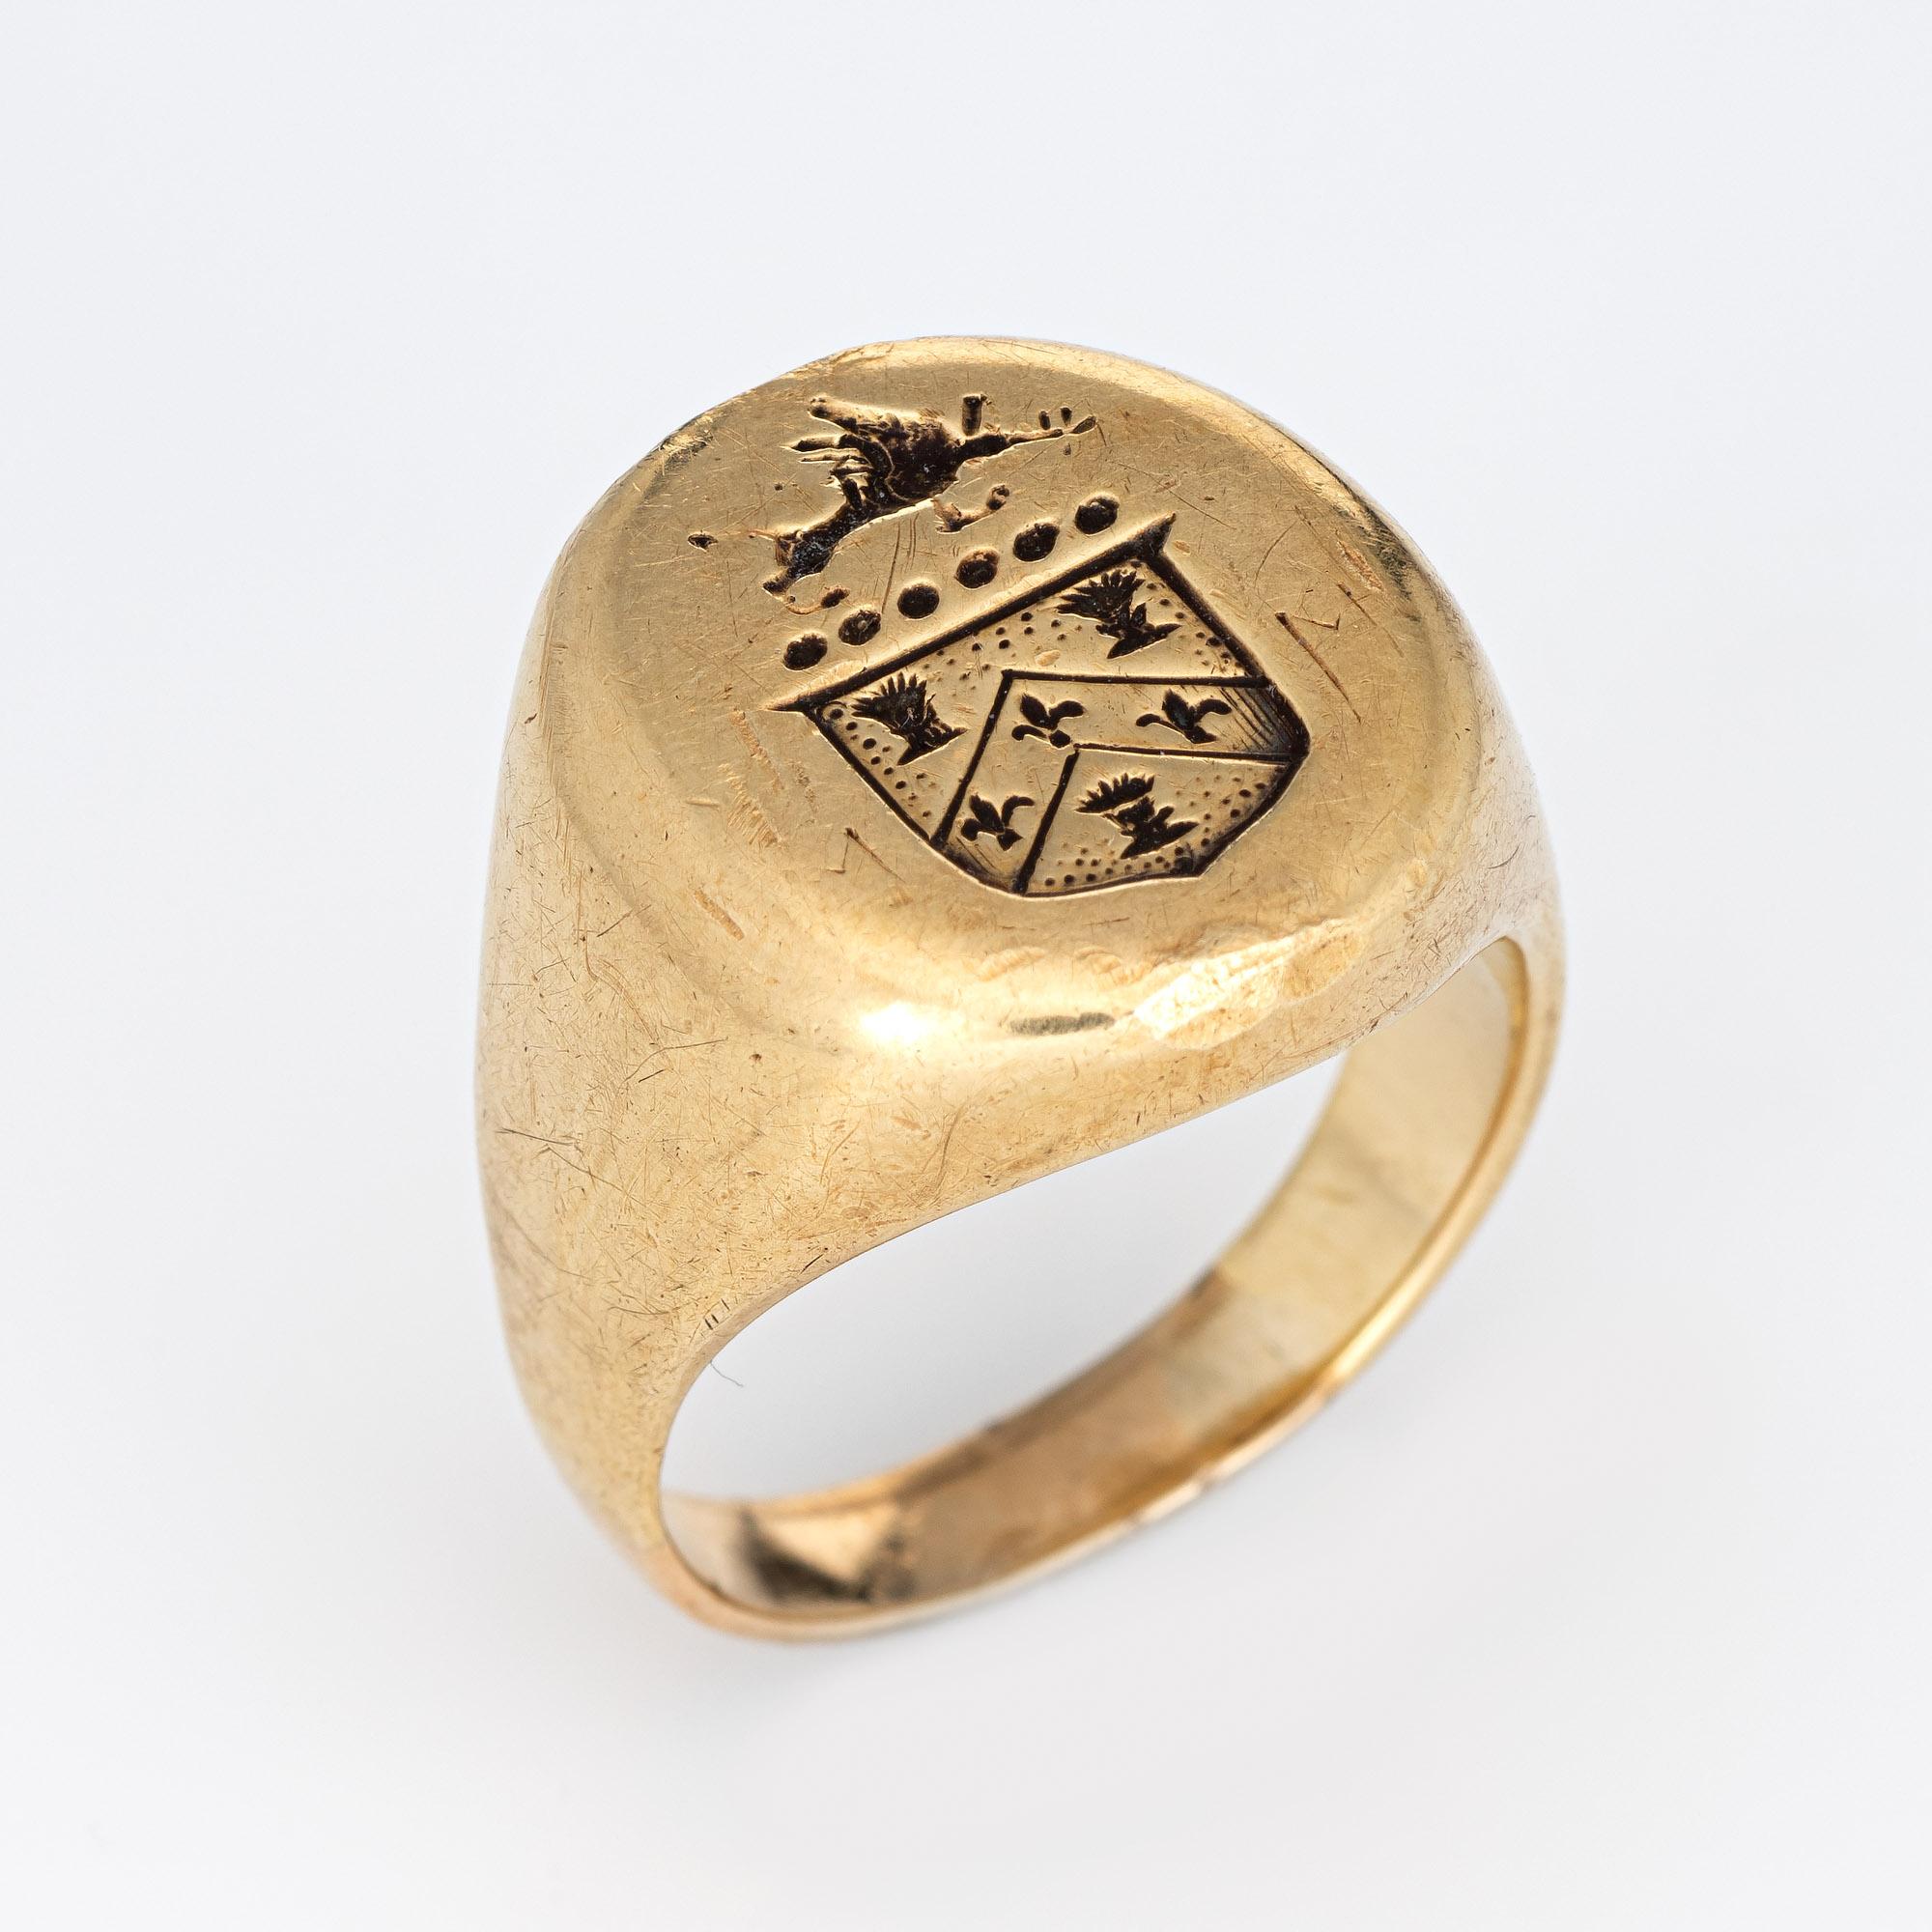 Finely detailed vintage Art Deco era family crest signet ring (circa 1920s to 1930s) crafted in 14 karat yellow gold. 

The signet ring weighs a hefty 21.4 grams. The signet mount features a bird to the top, with a shield detailed with three wheat